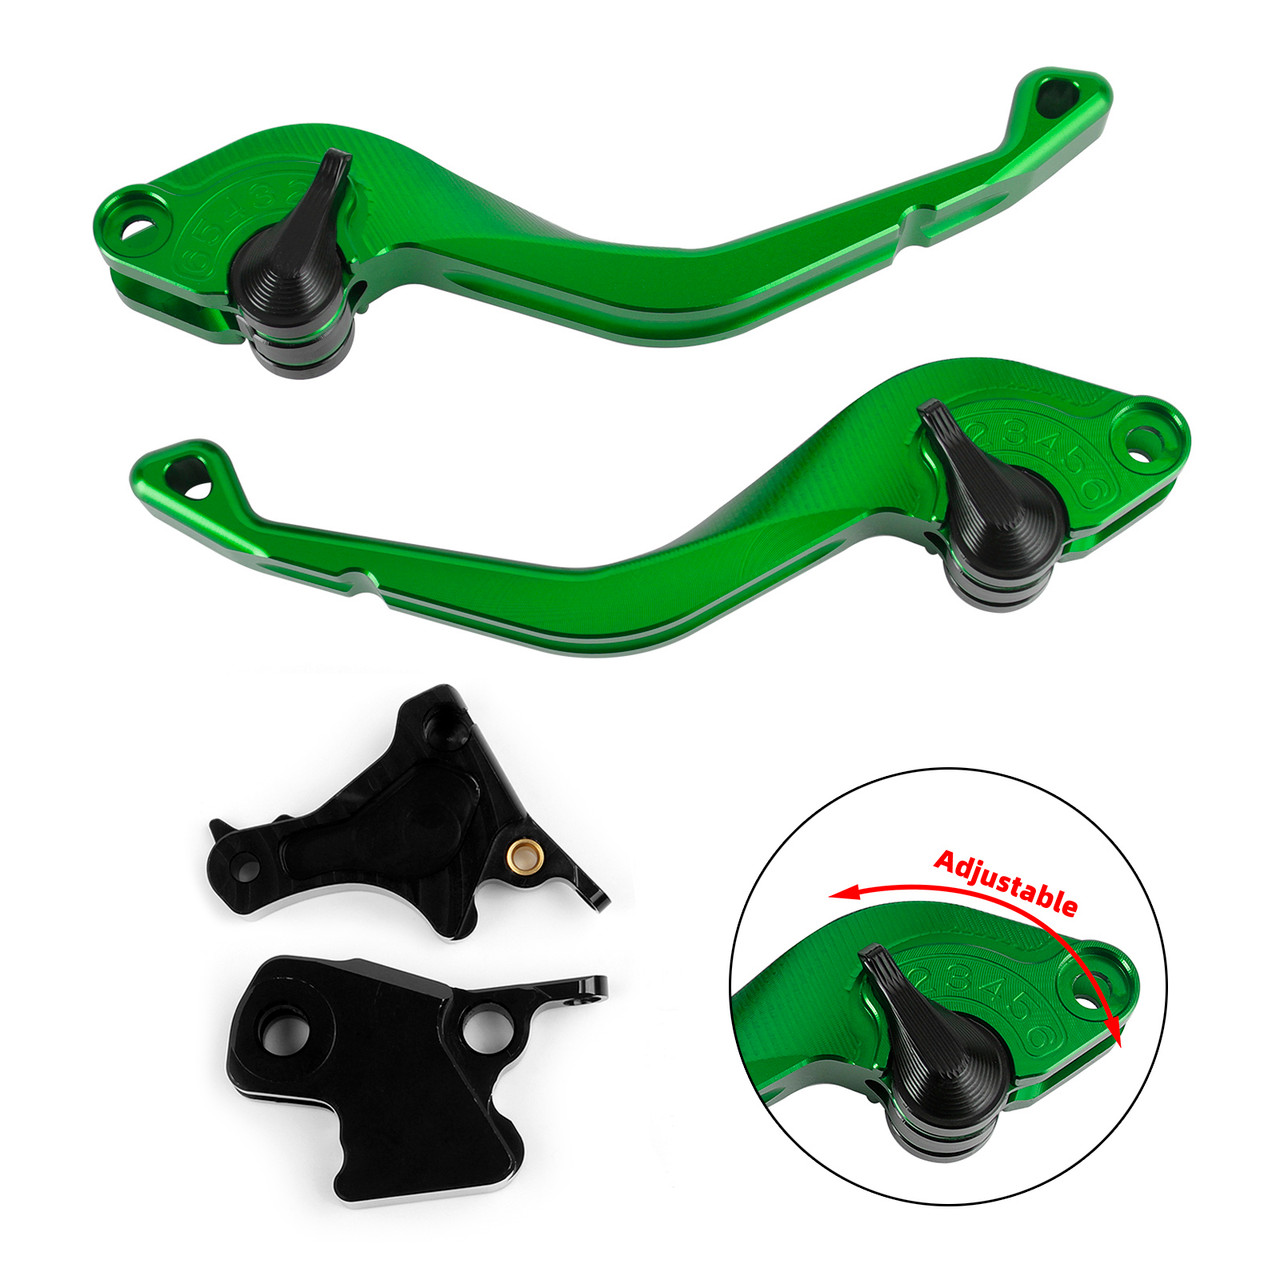 CNC Short Clutch Brake Lever fit for BMW F650GS F700GS F800S F800ST F800GT